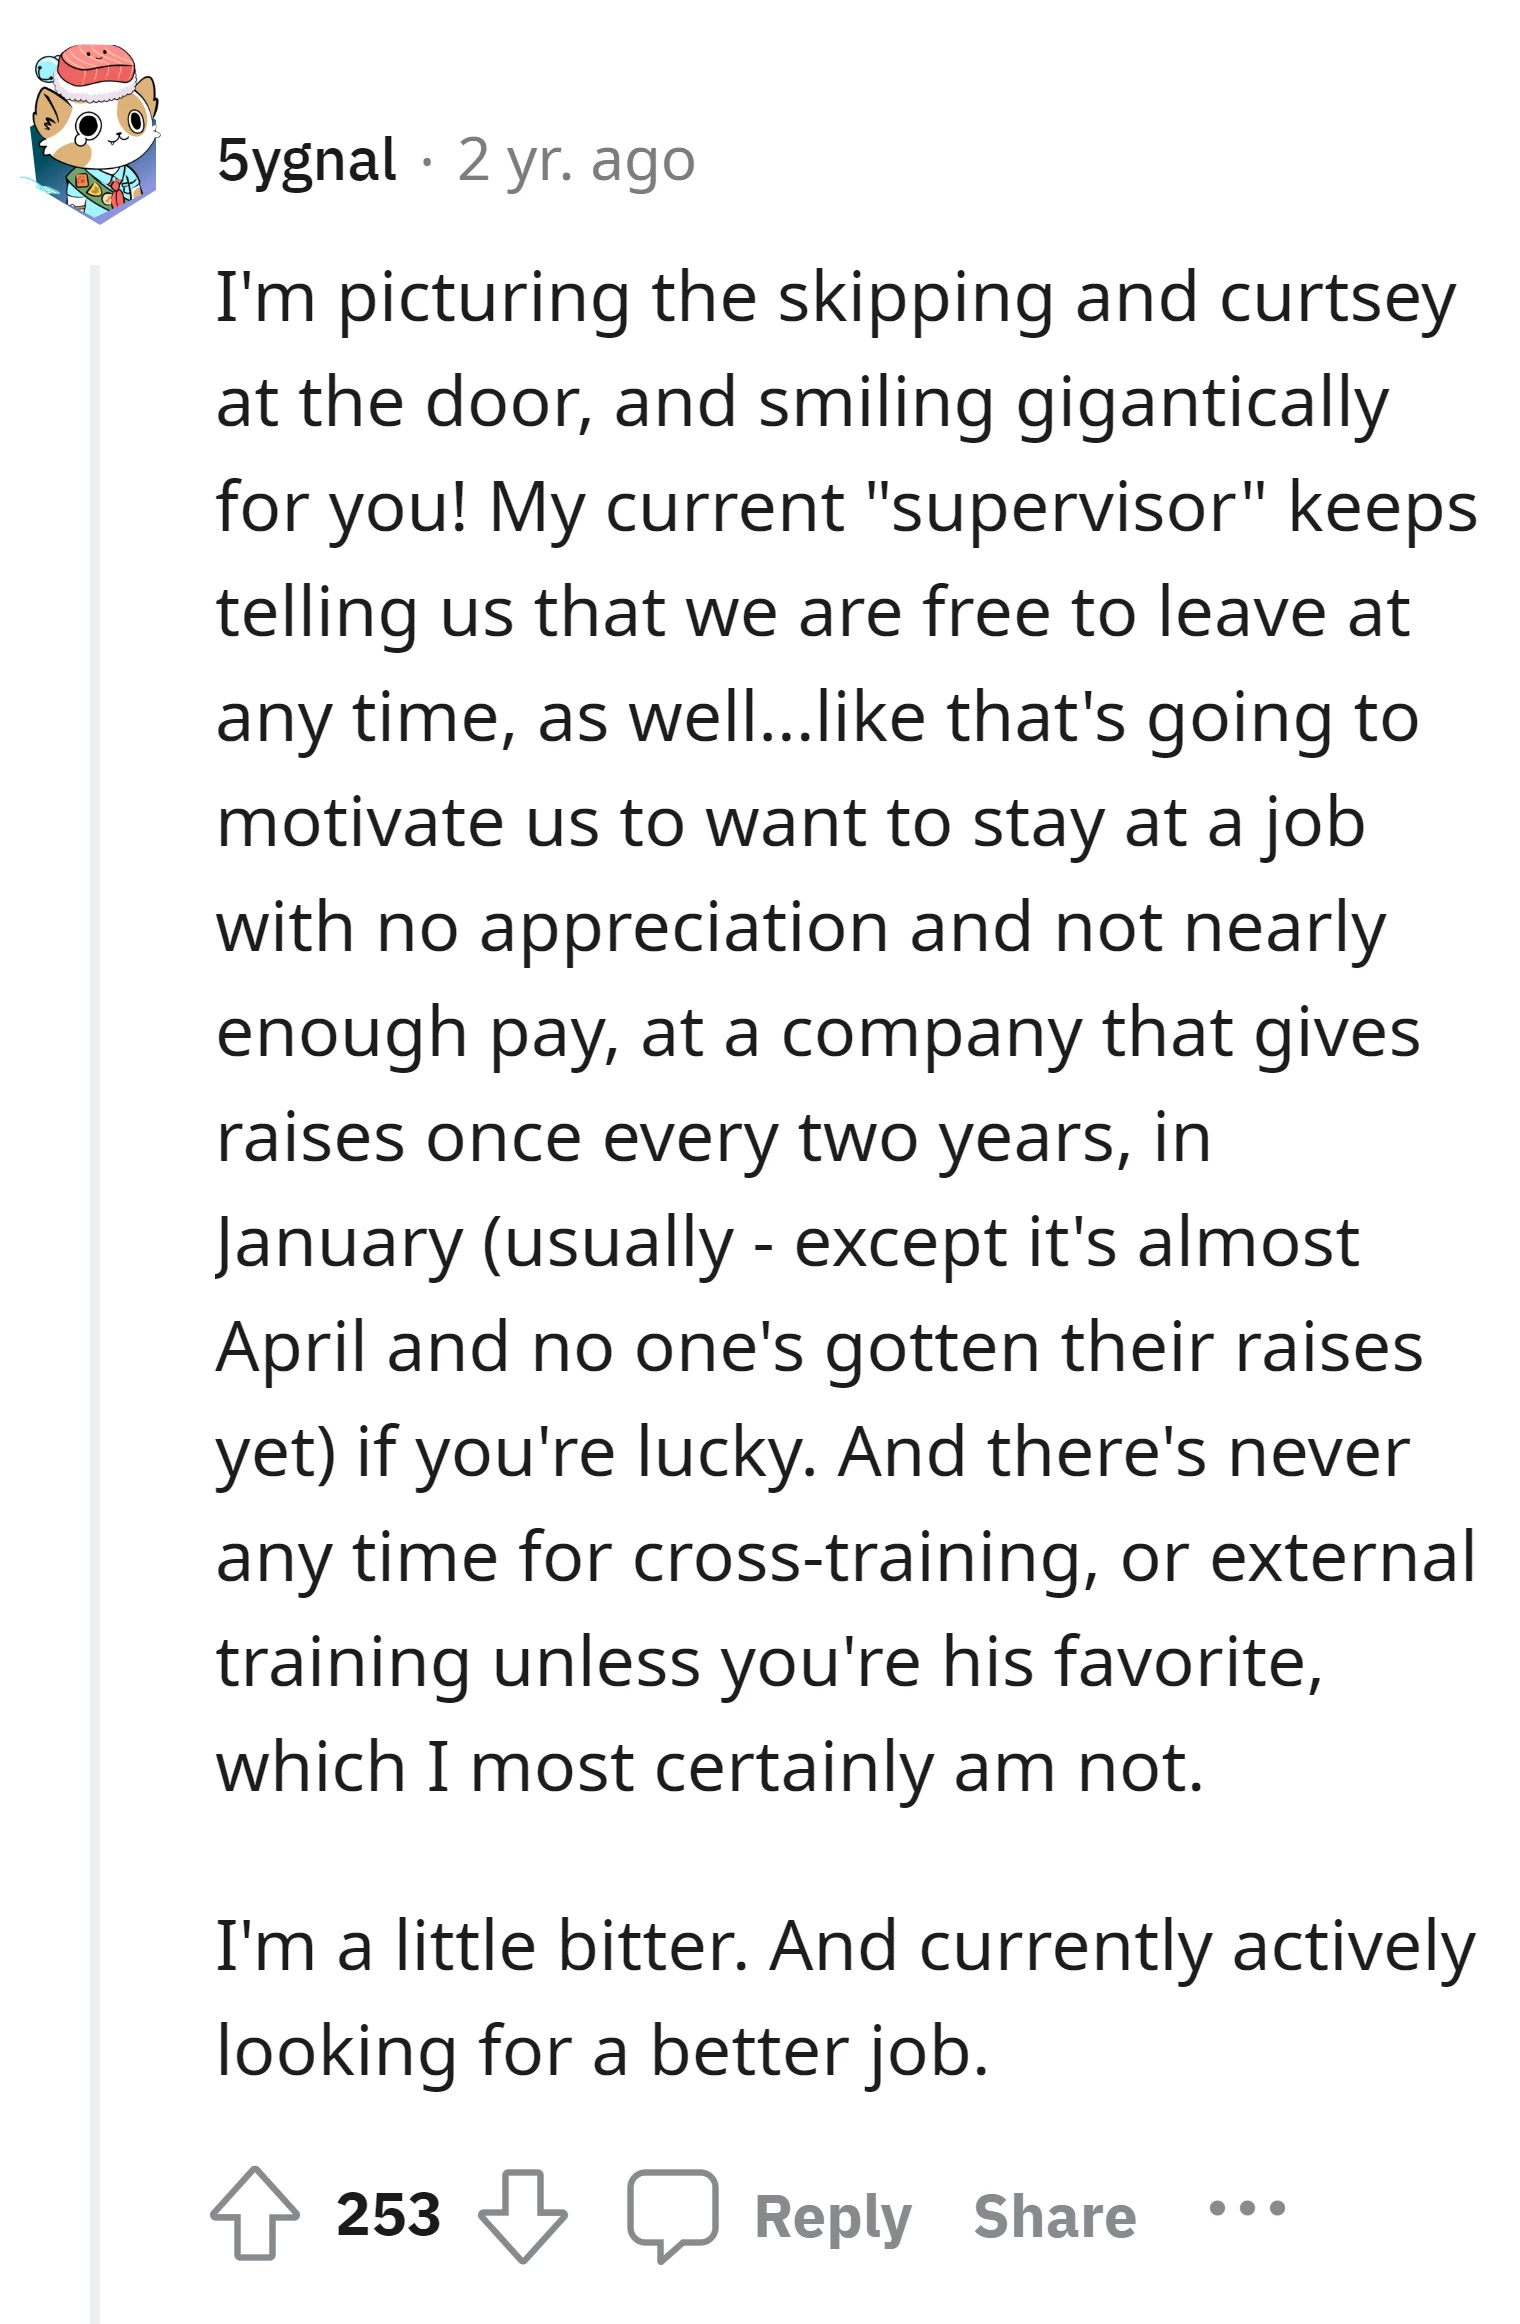 The commenter shares their bitter experience with a supervisor who emphasizes the option to leave anytime